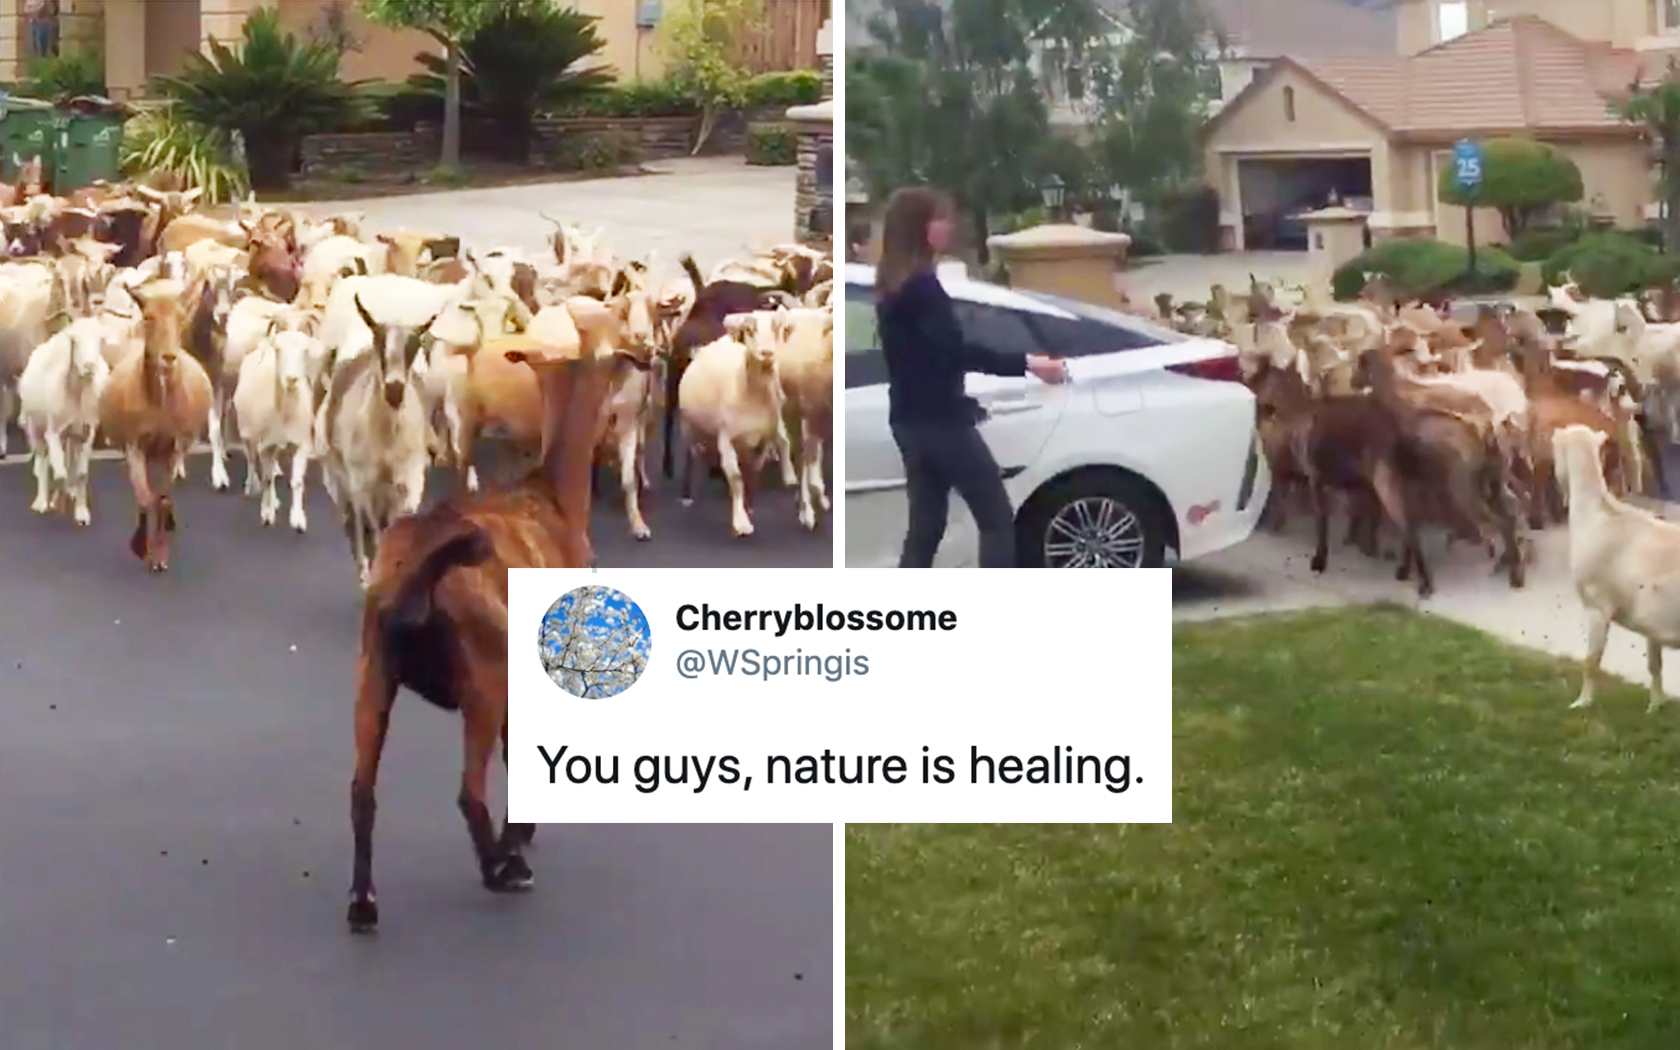 200 Escaped Goats Broke A Fence & Took Over The Streets Of California